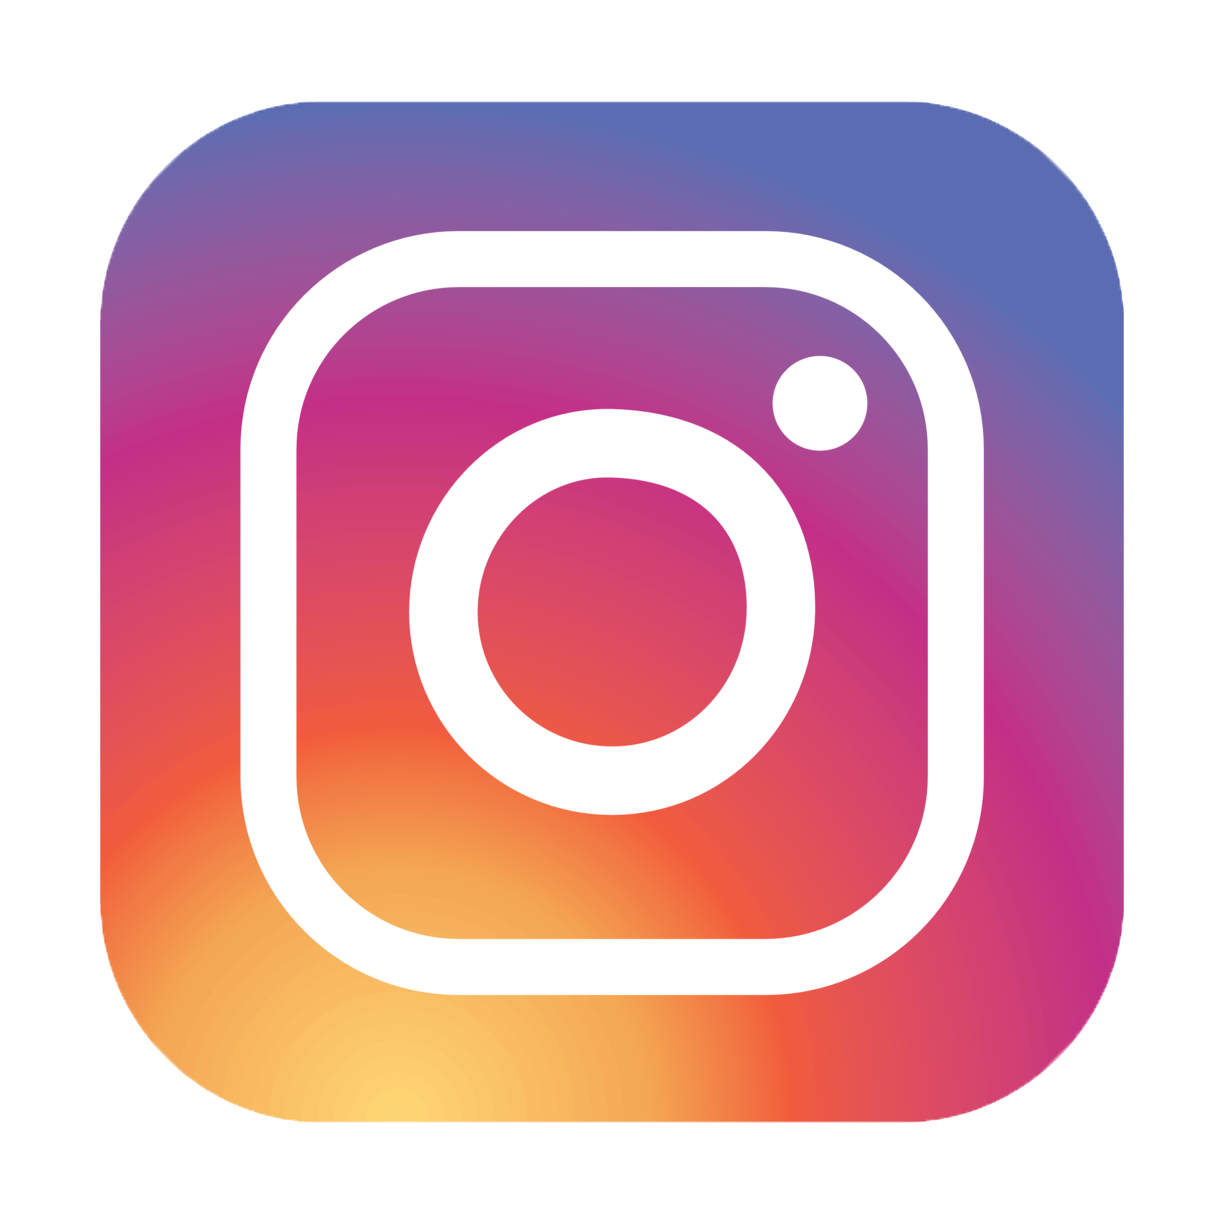 Download Computer Instagram Icons PNG File HD ICON free | FreePNGImg